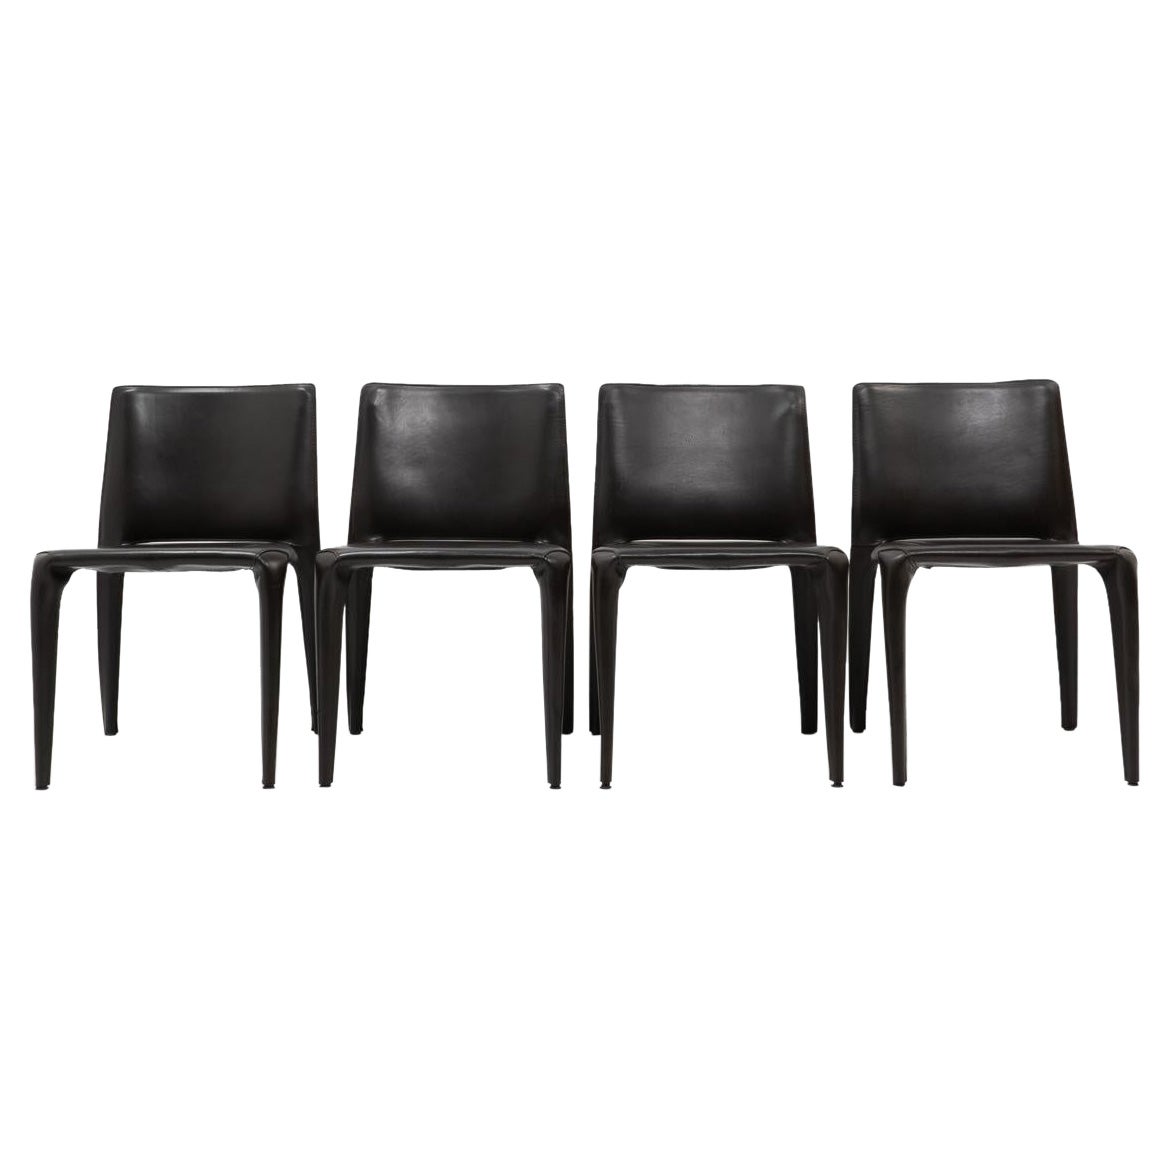 Mario Bellini “Bull” Side Chairs for Cassina, Set of Four, 1990s For Sale